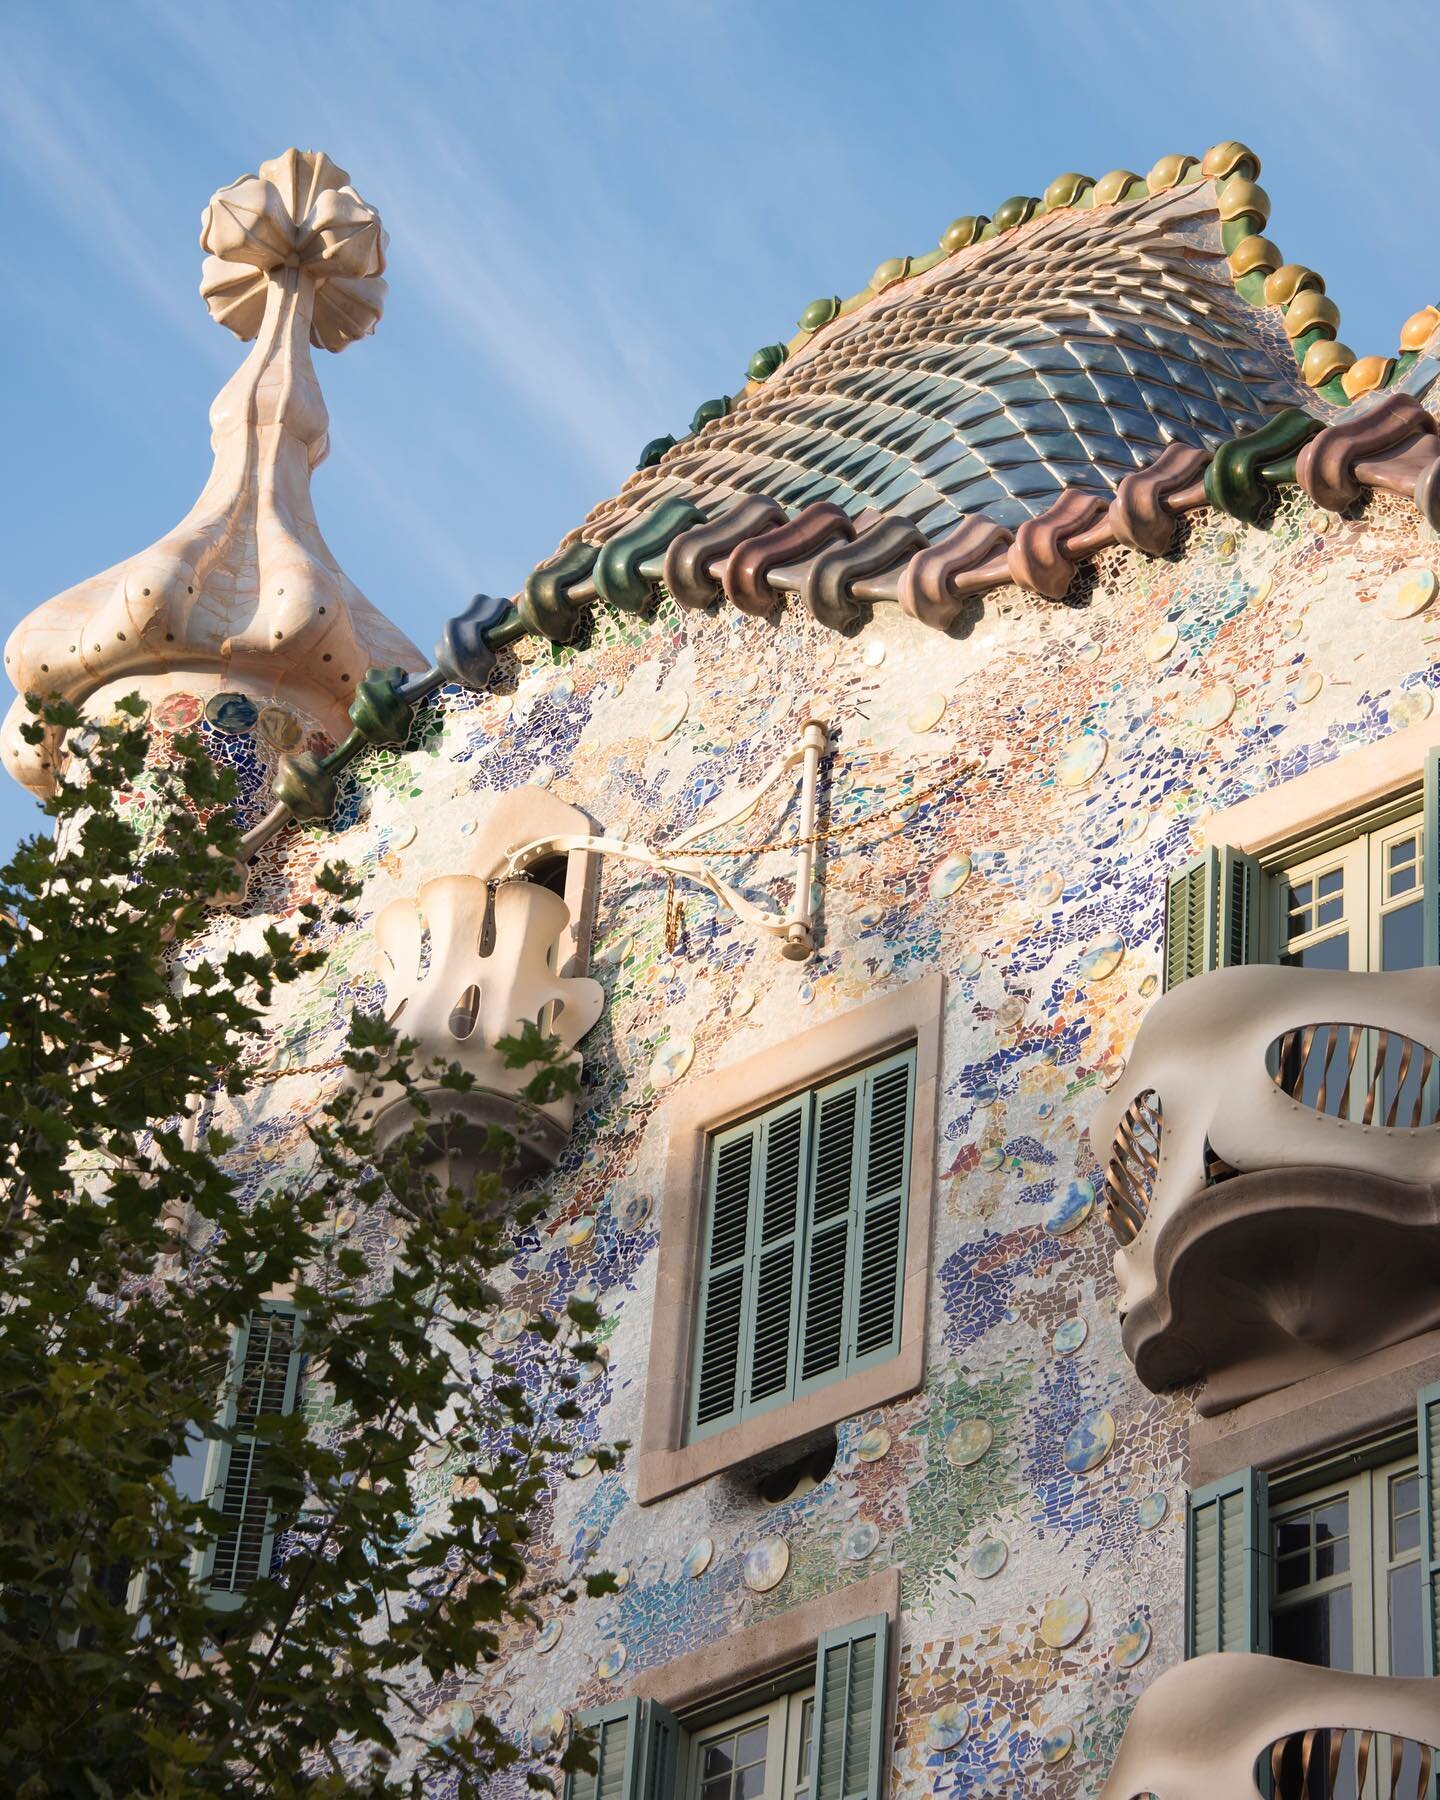 GET YOUR GAUD&Iacute; ON 🐉

As one of the most studied architects of his era, Gaud&iacute;&rsquo;s masterpieces epitomise his personal, inimitable style that transcended through the architectural movement of the Catalan equivalent of Art Nouveau, ot